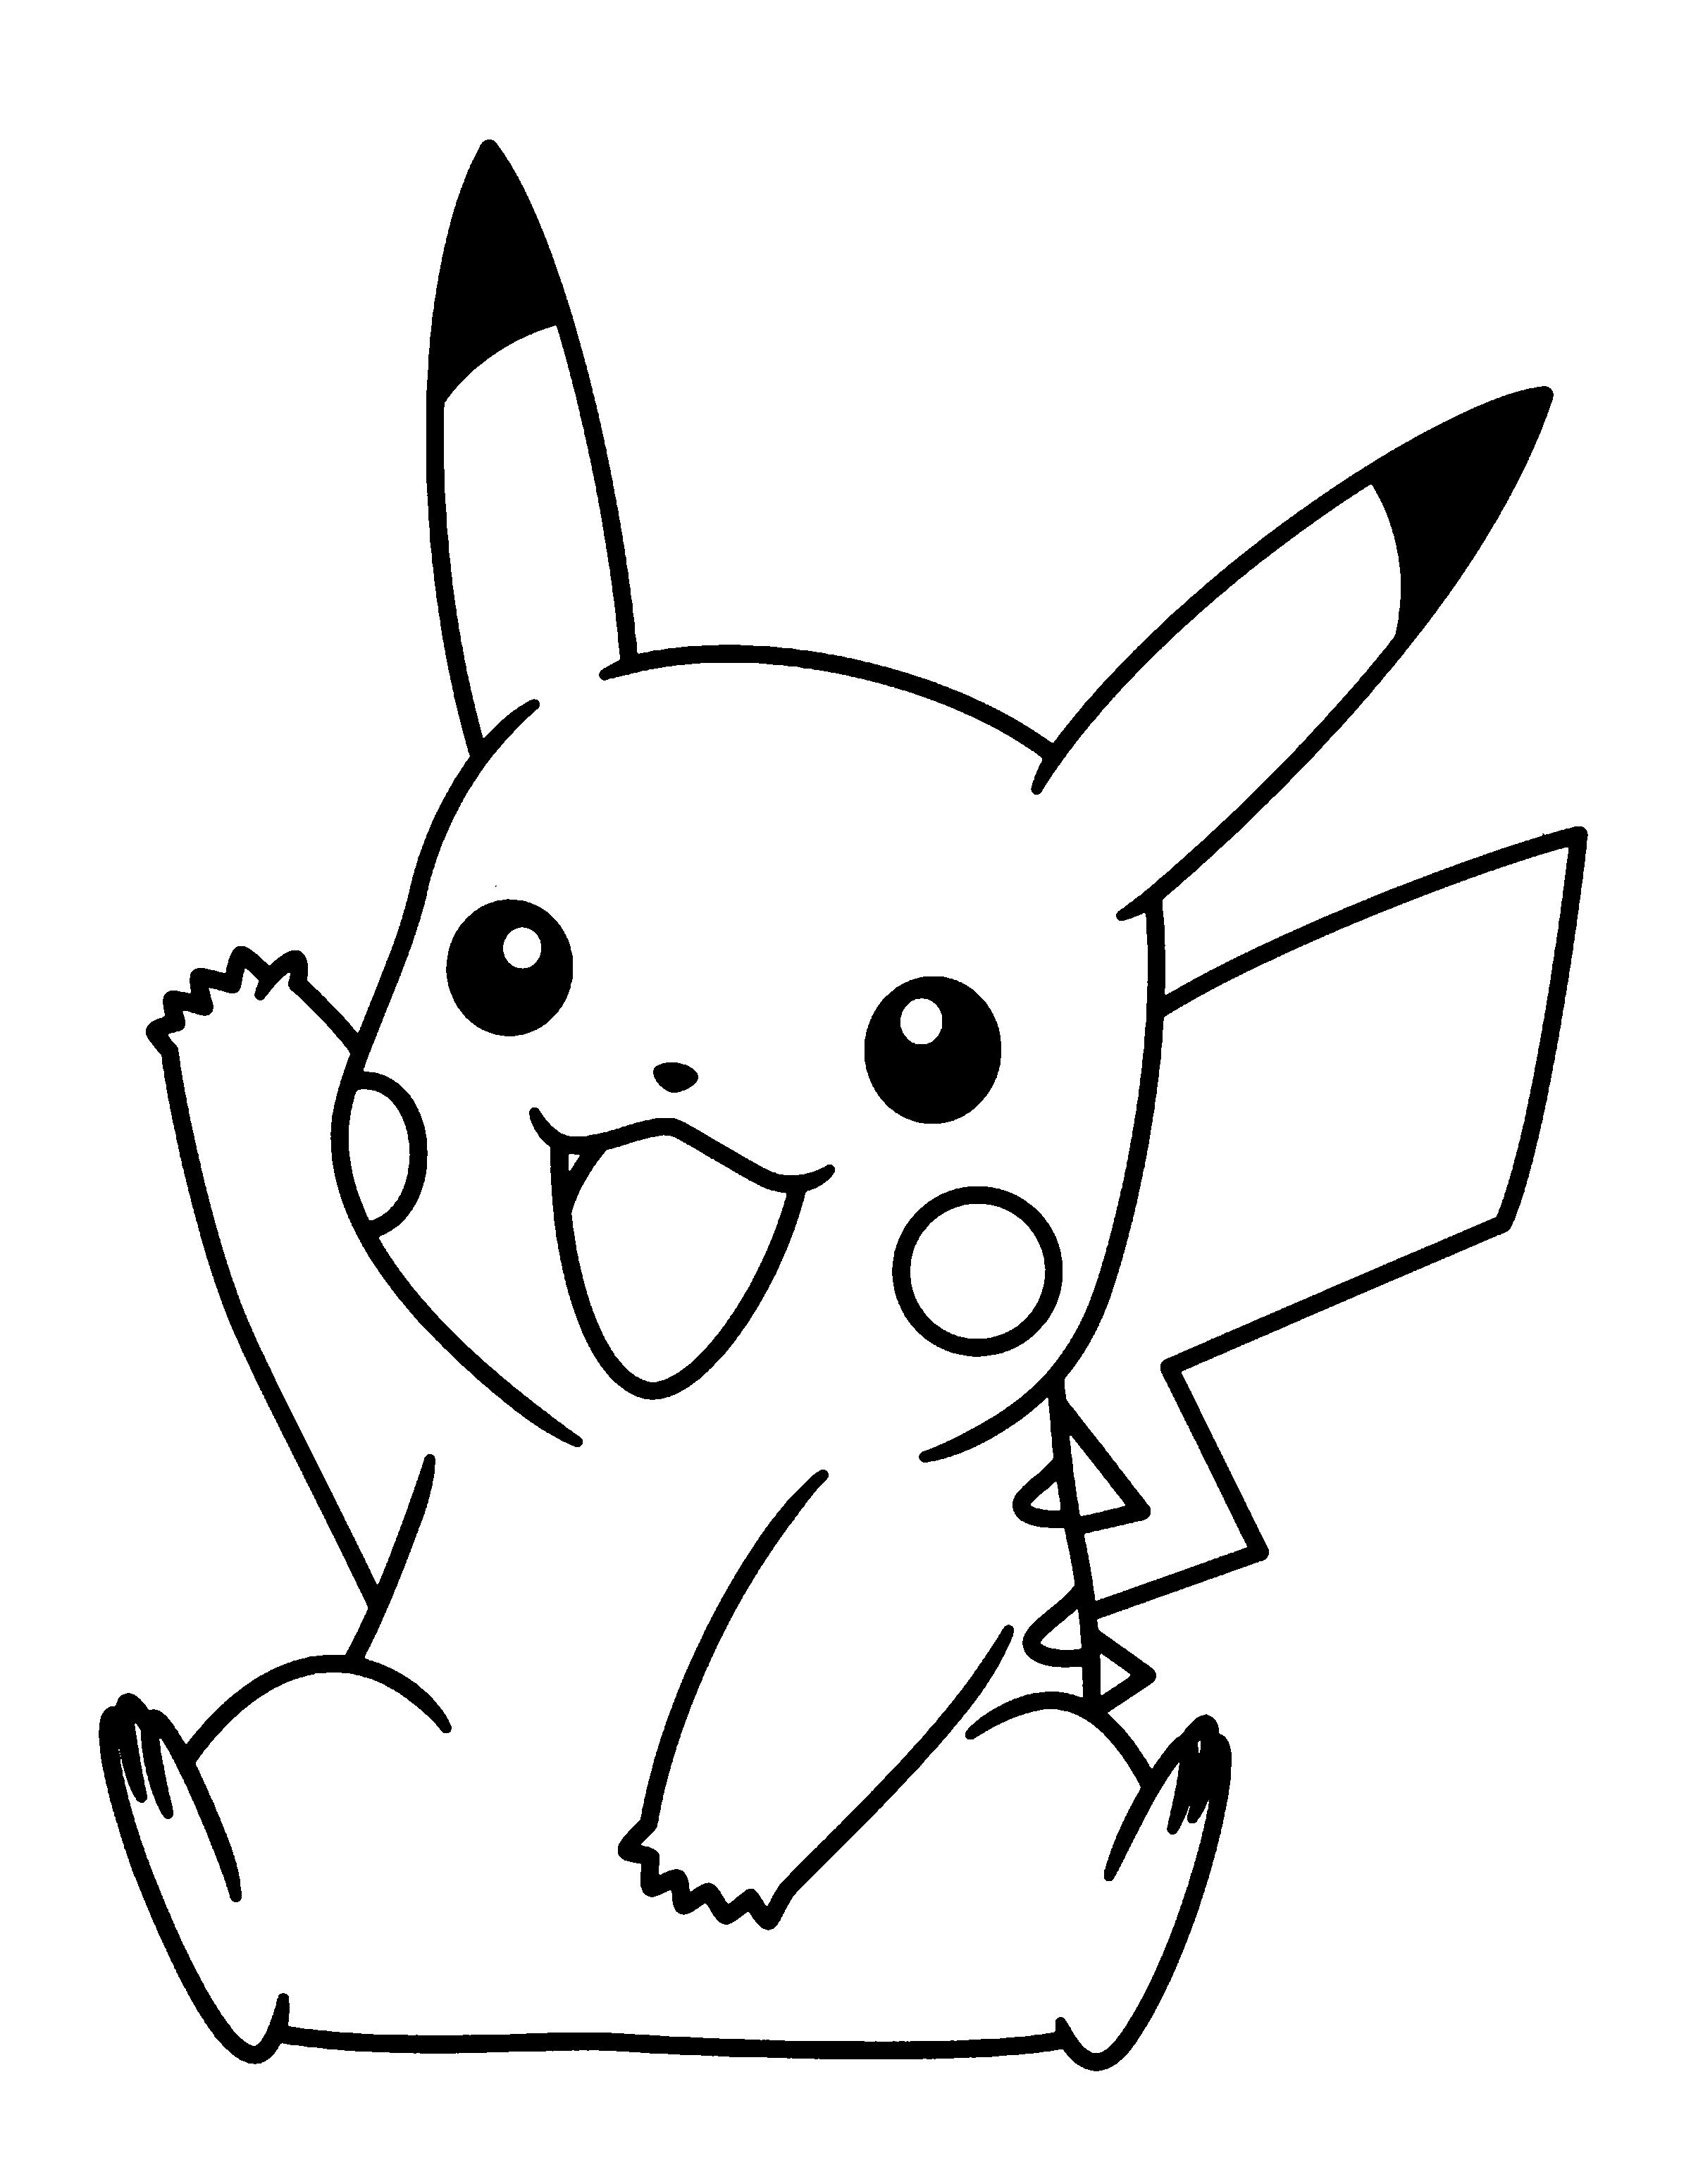 Pikachu coloring pages to download and print for free ...